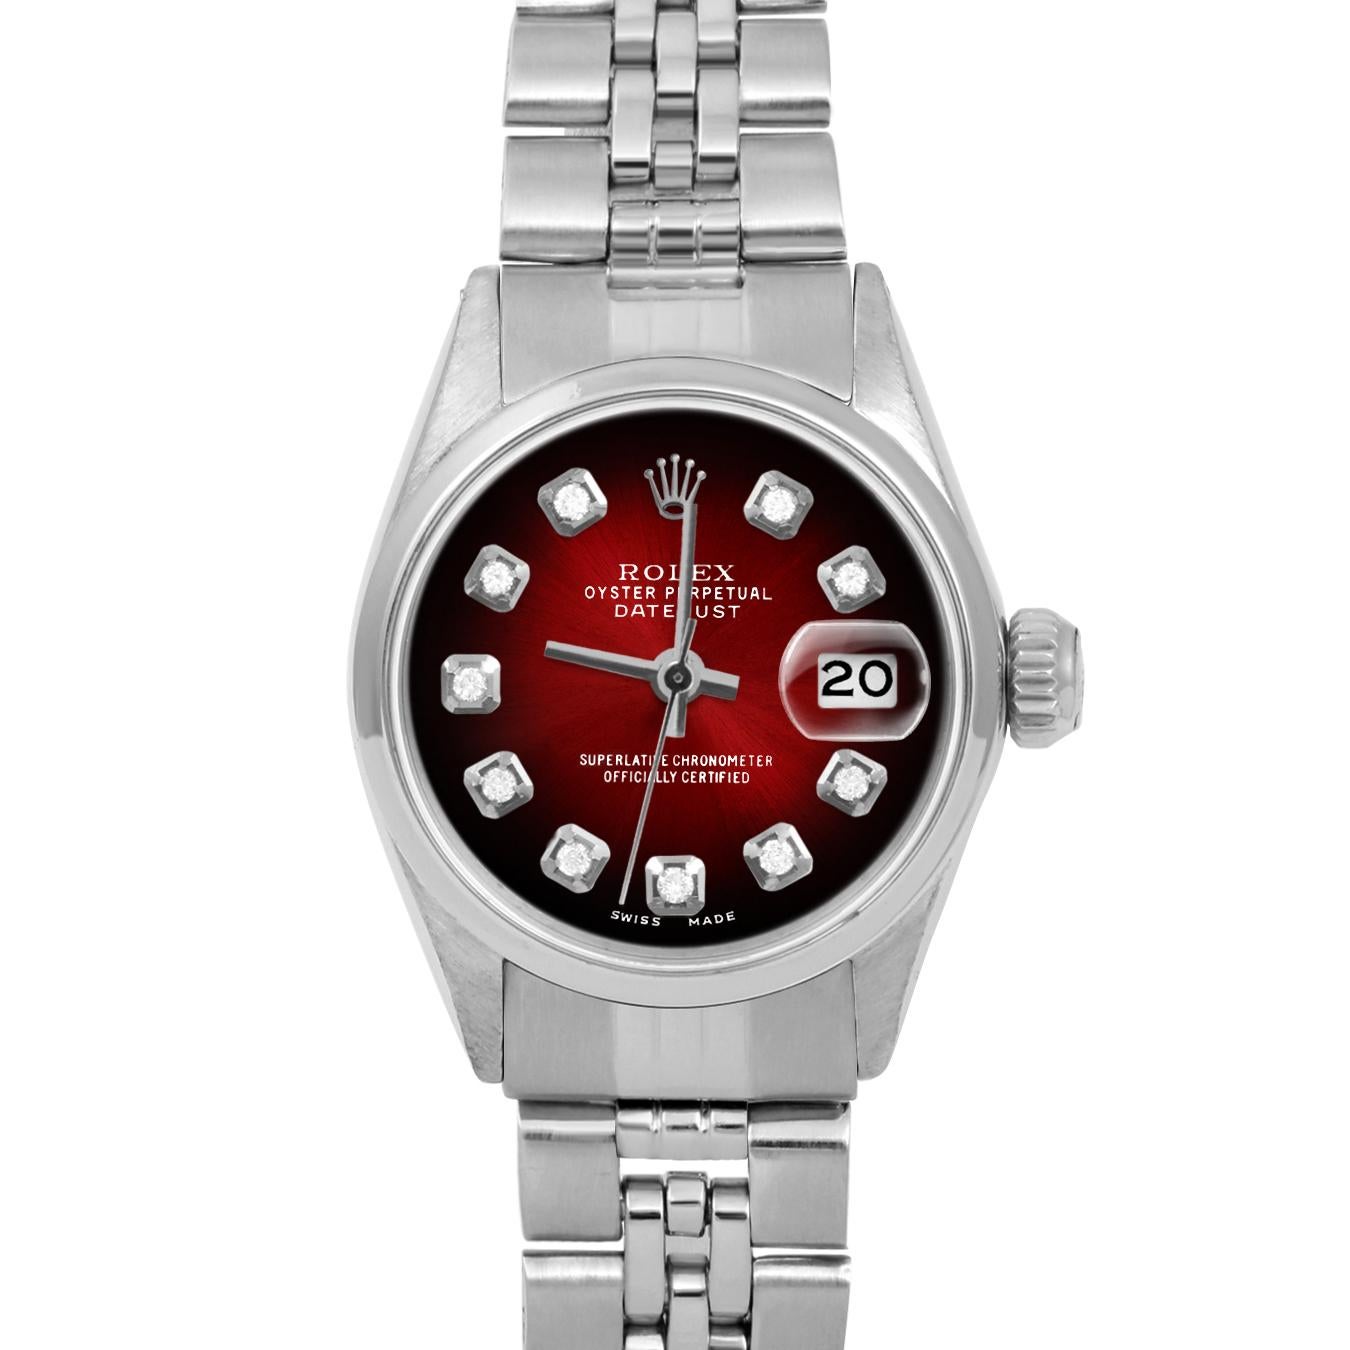 Brand : Rolex
Model : Datejust (Non-Quickset Model)
Gender : Ladies
Metals : Stainless Steel
Case Size : 24 mm

Dial : Custom Red Vignette Diamond Dial (This dial is not original Rolex And has been added aftermarket yet is a beautiful Custom